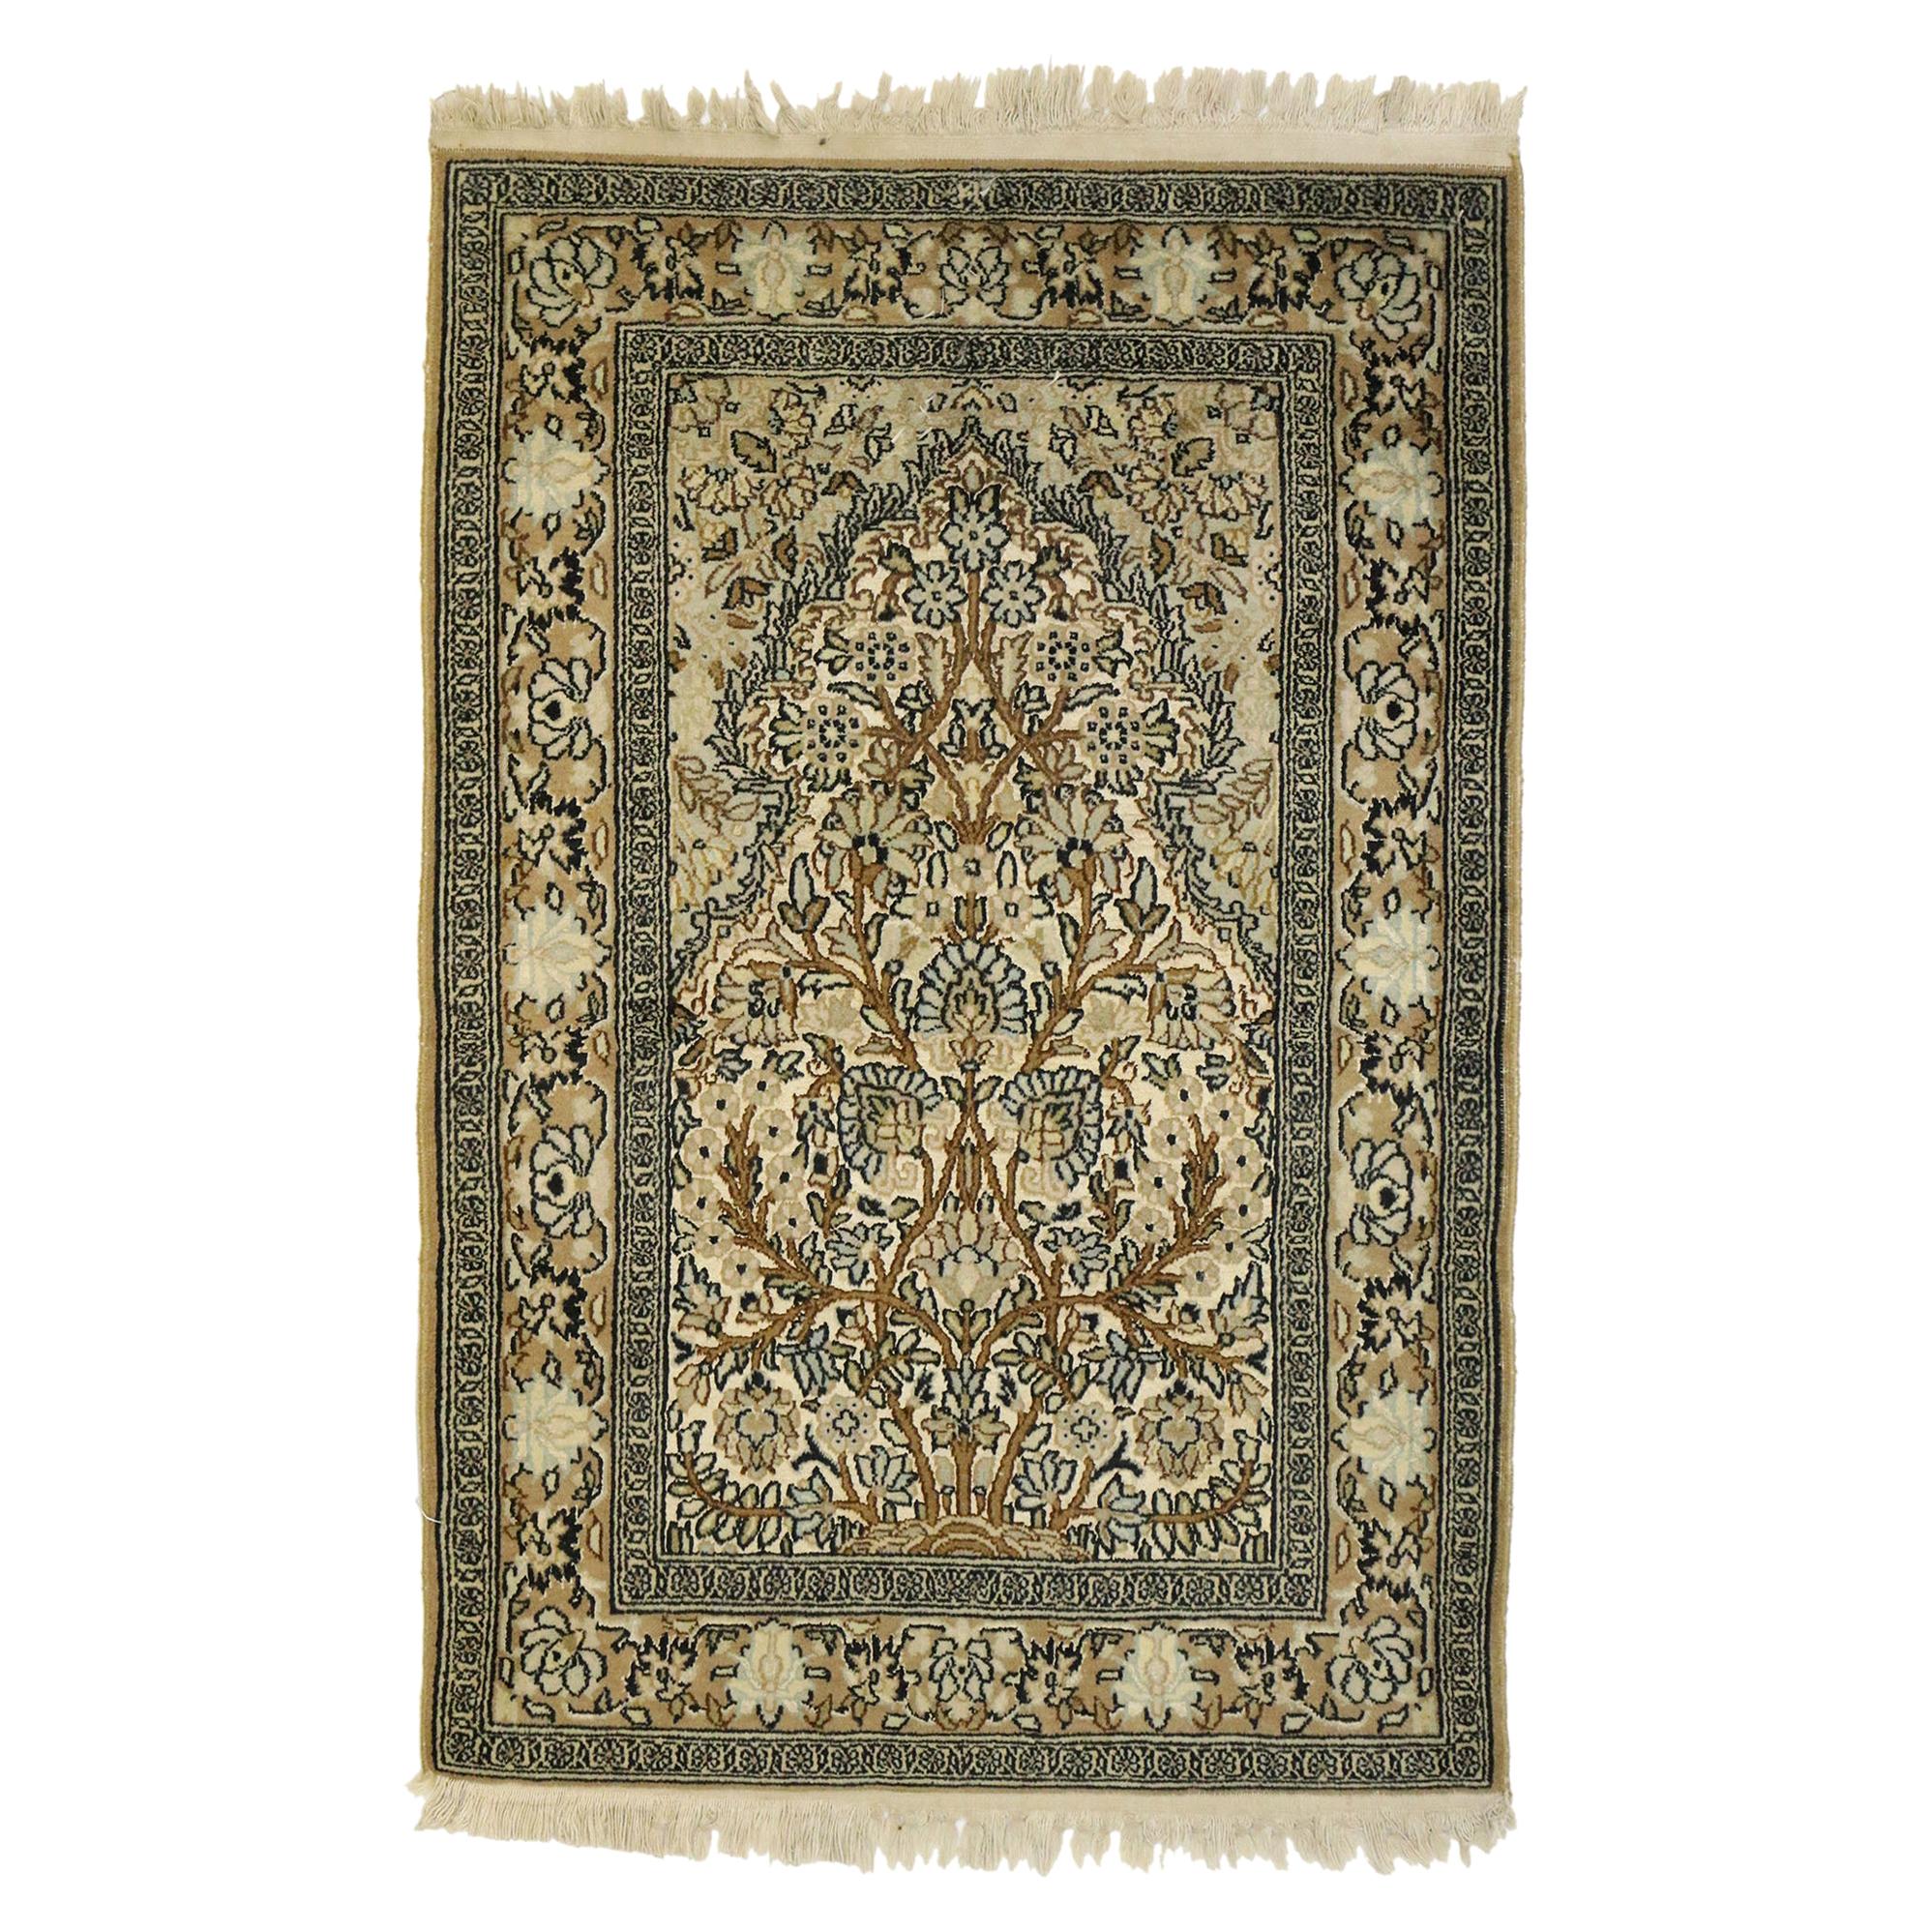 Vintage Pakistani Persian Style Prayer Rug with Directional Layout Design